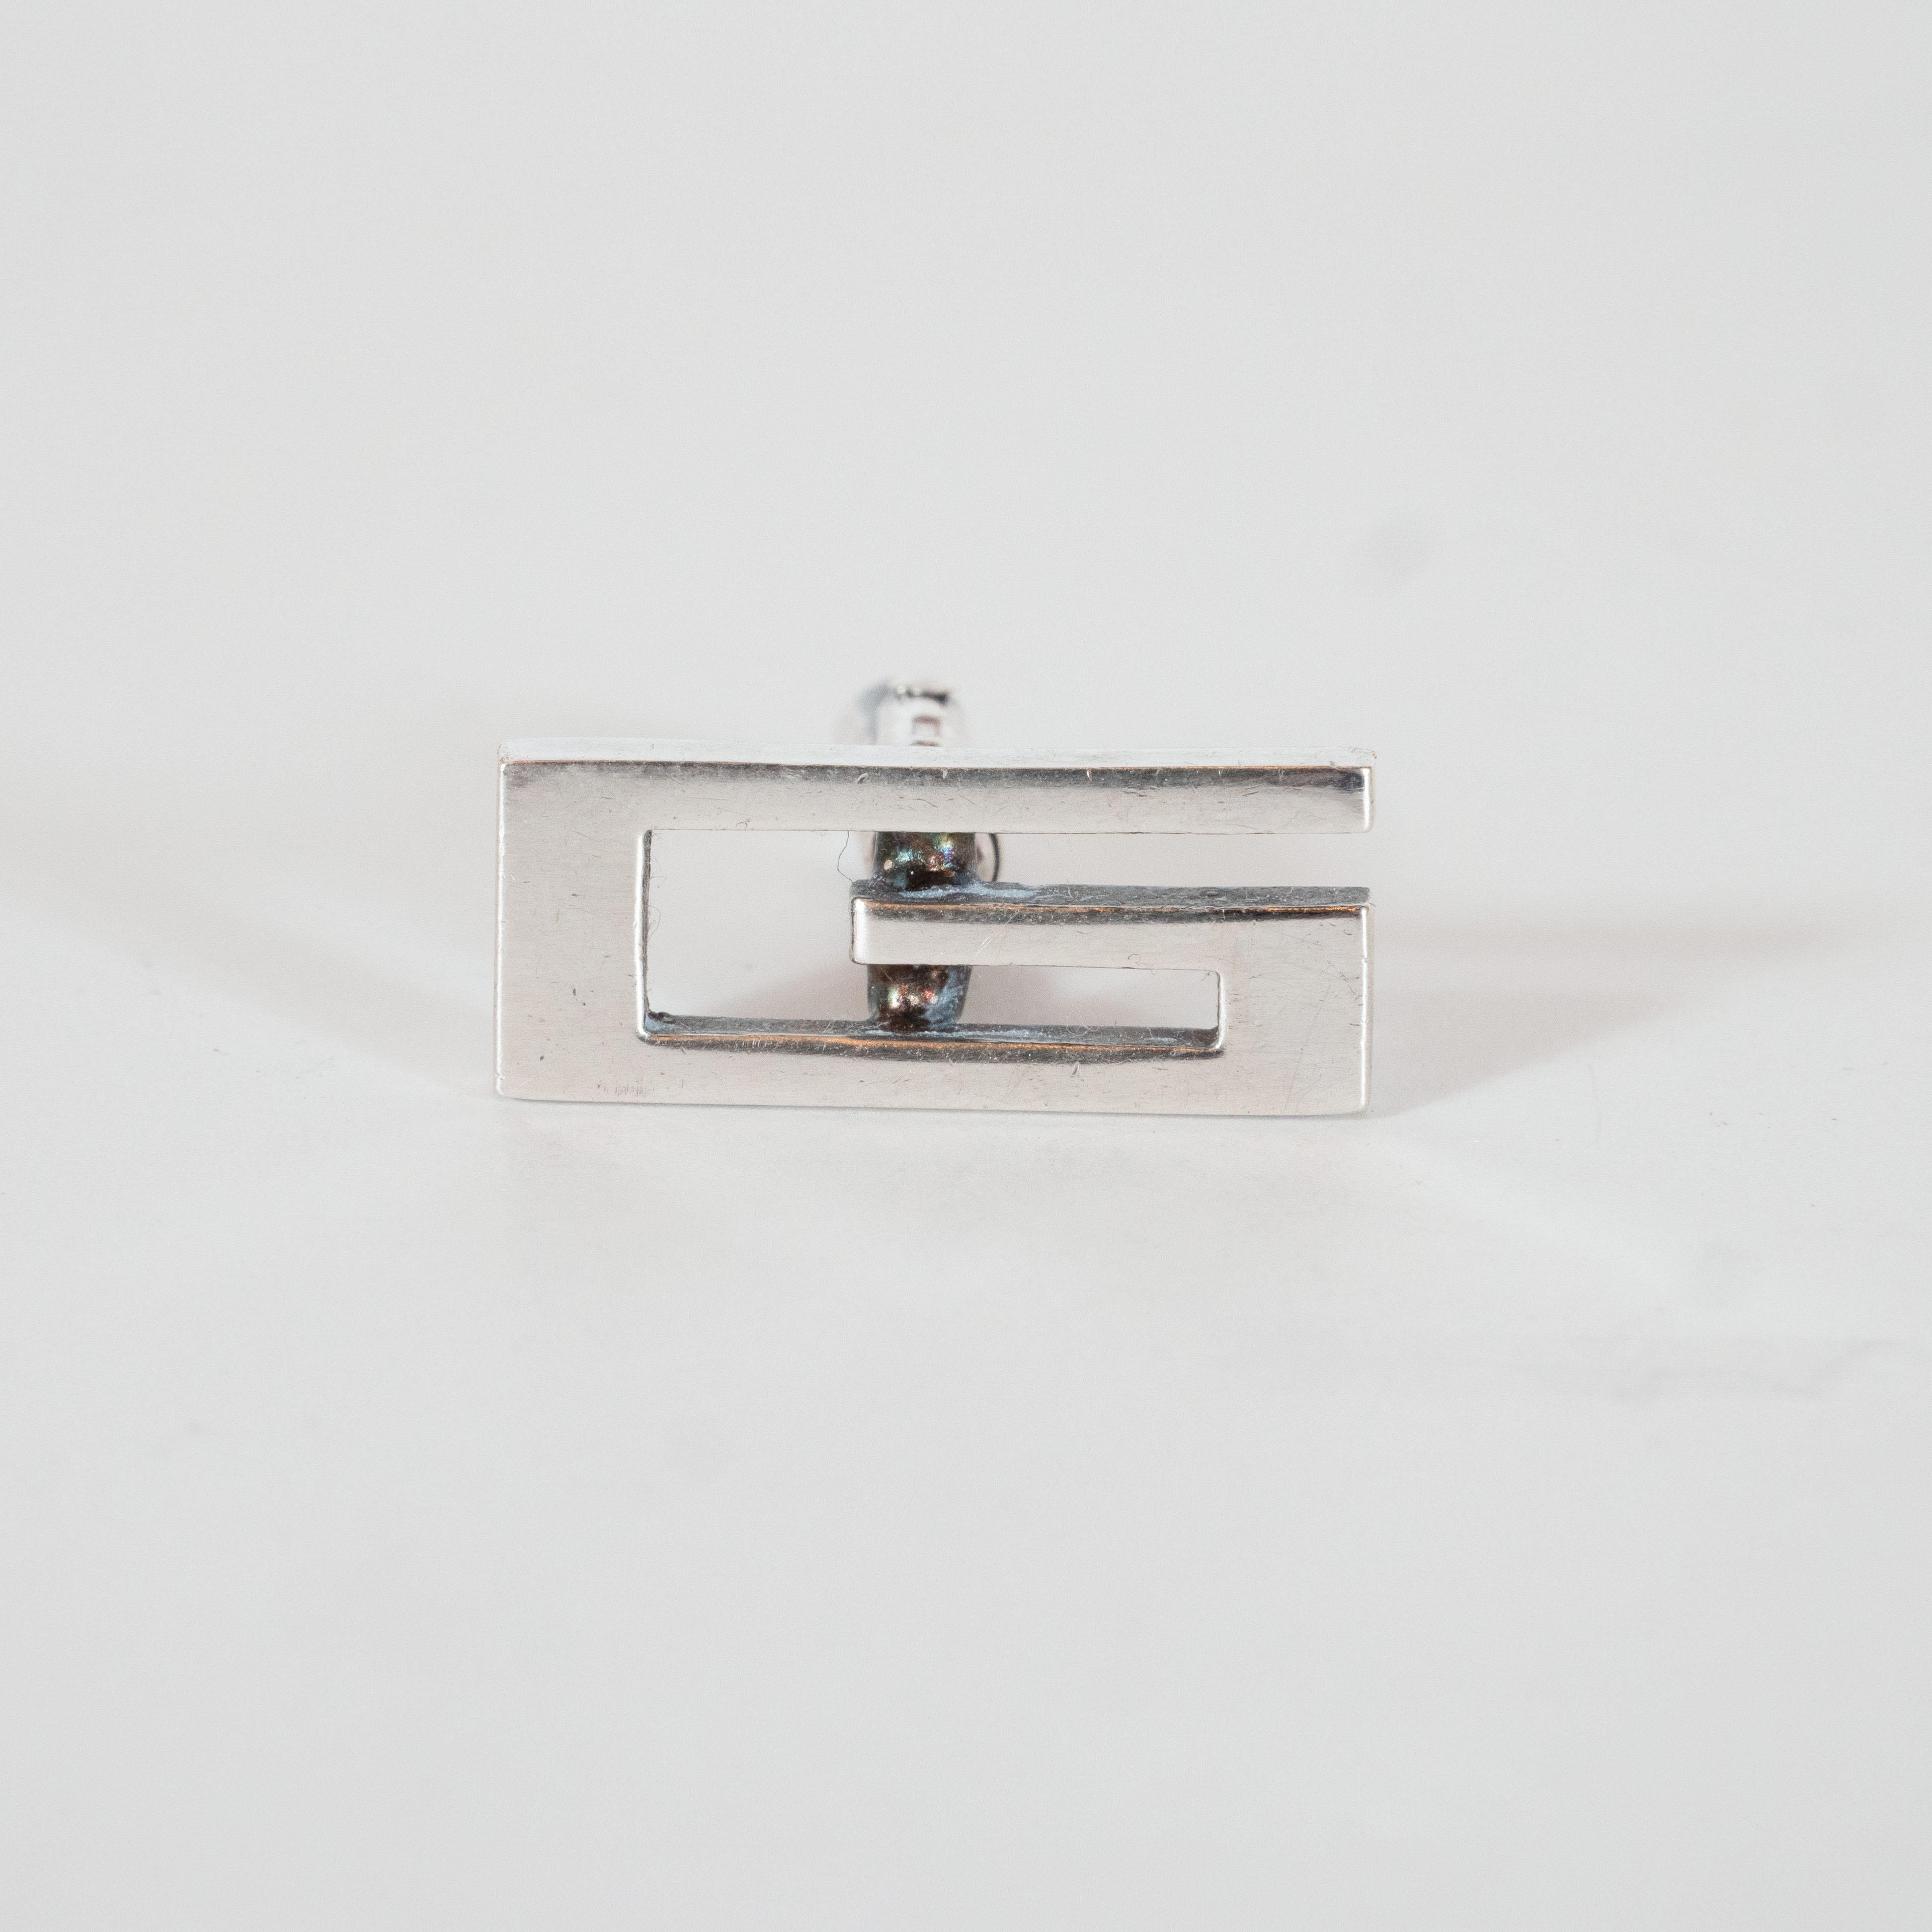 This stunning pair of cufflinks were produced by Gucci- one of the world's foremost luxury brands, based in Florence, Italy since 1921. They feature a rectilinear 